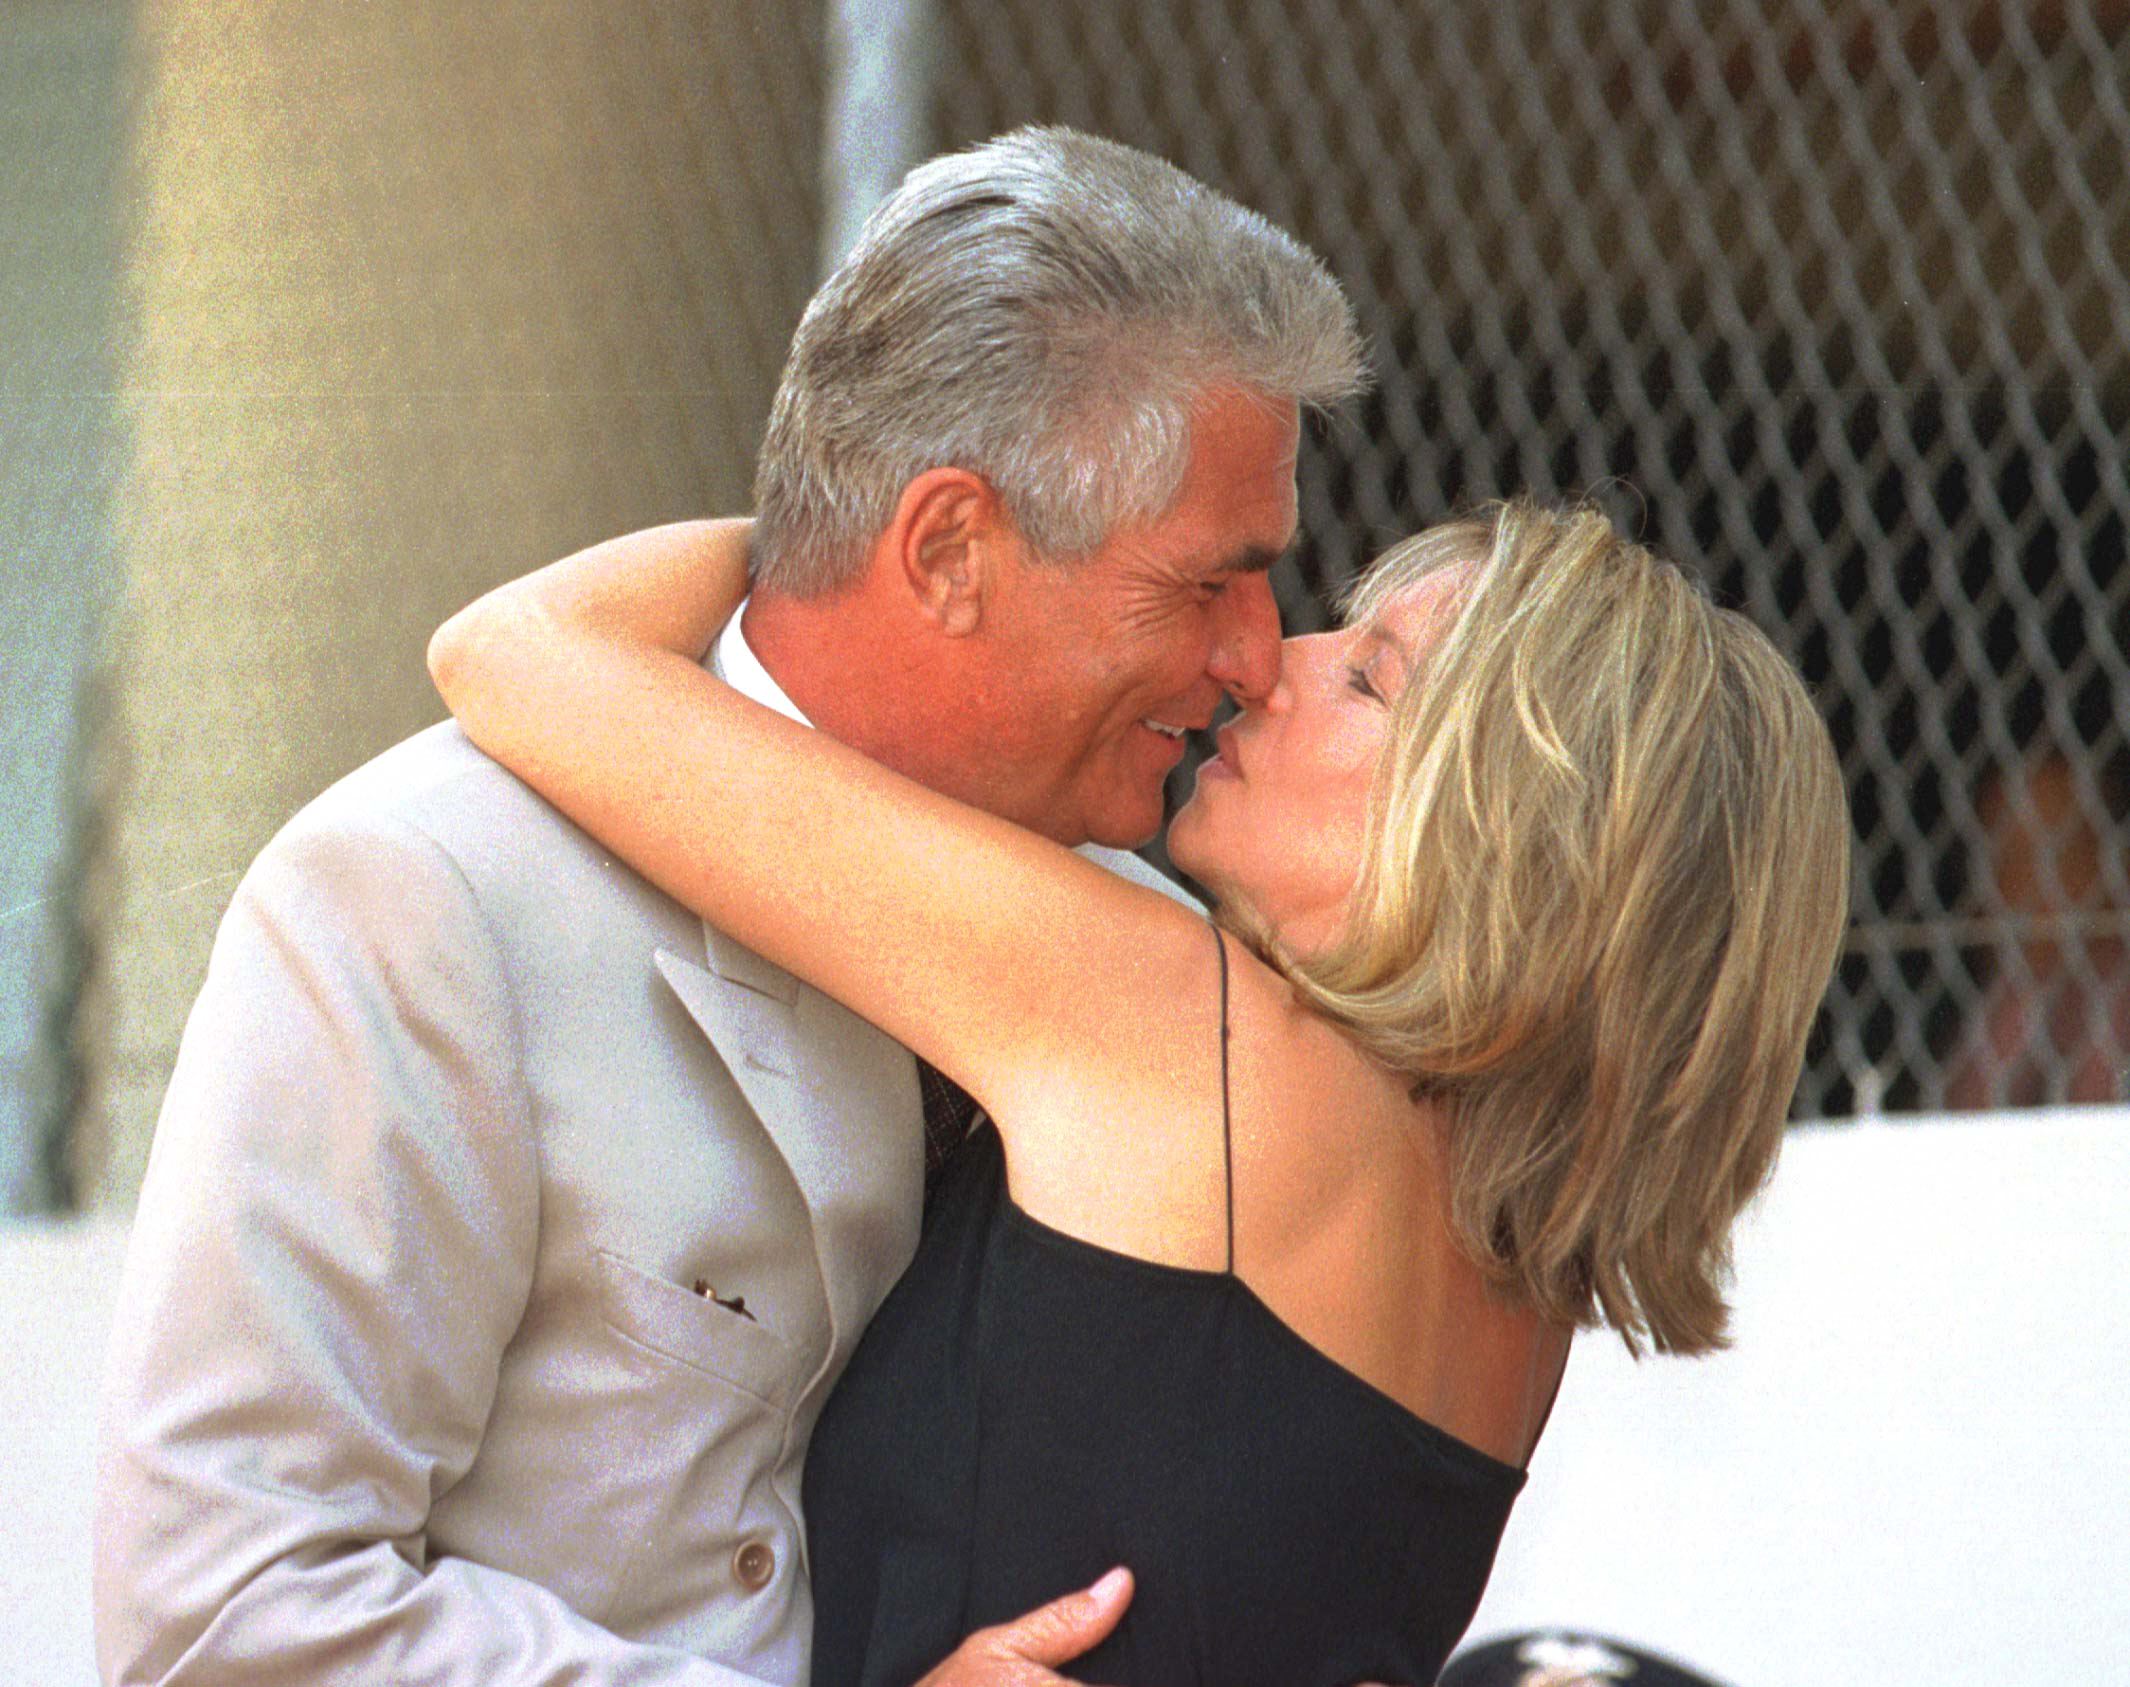 Barbra Streisand giving her husband, actor James Brolin, a kiss during his Hollywood star installation on the Walk of Fame in Hollywood, California on August 27, 1998 | Source: Getty Images